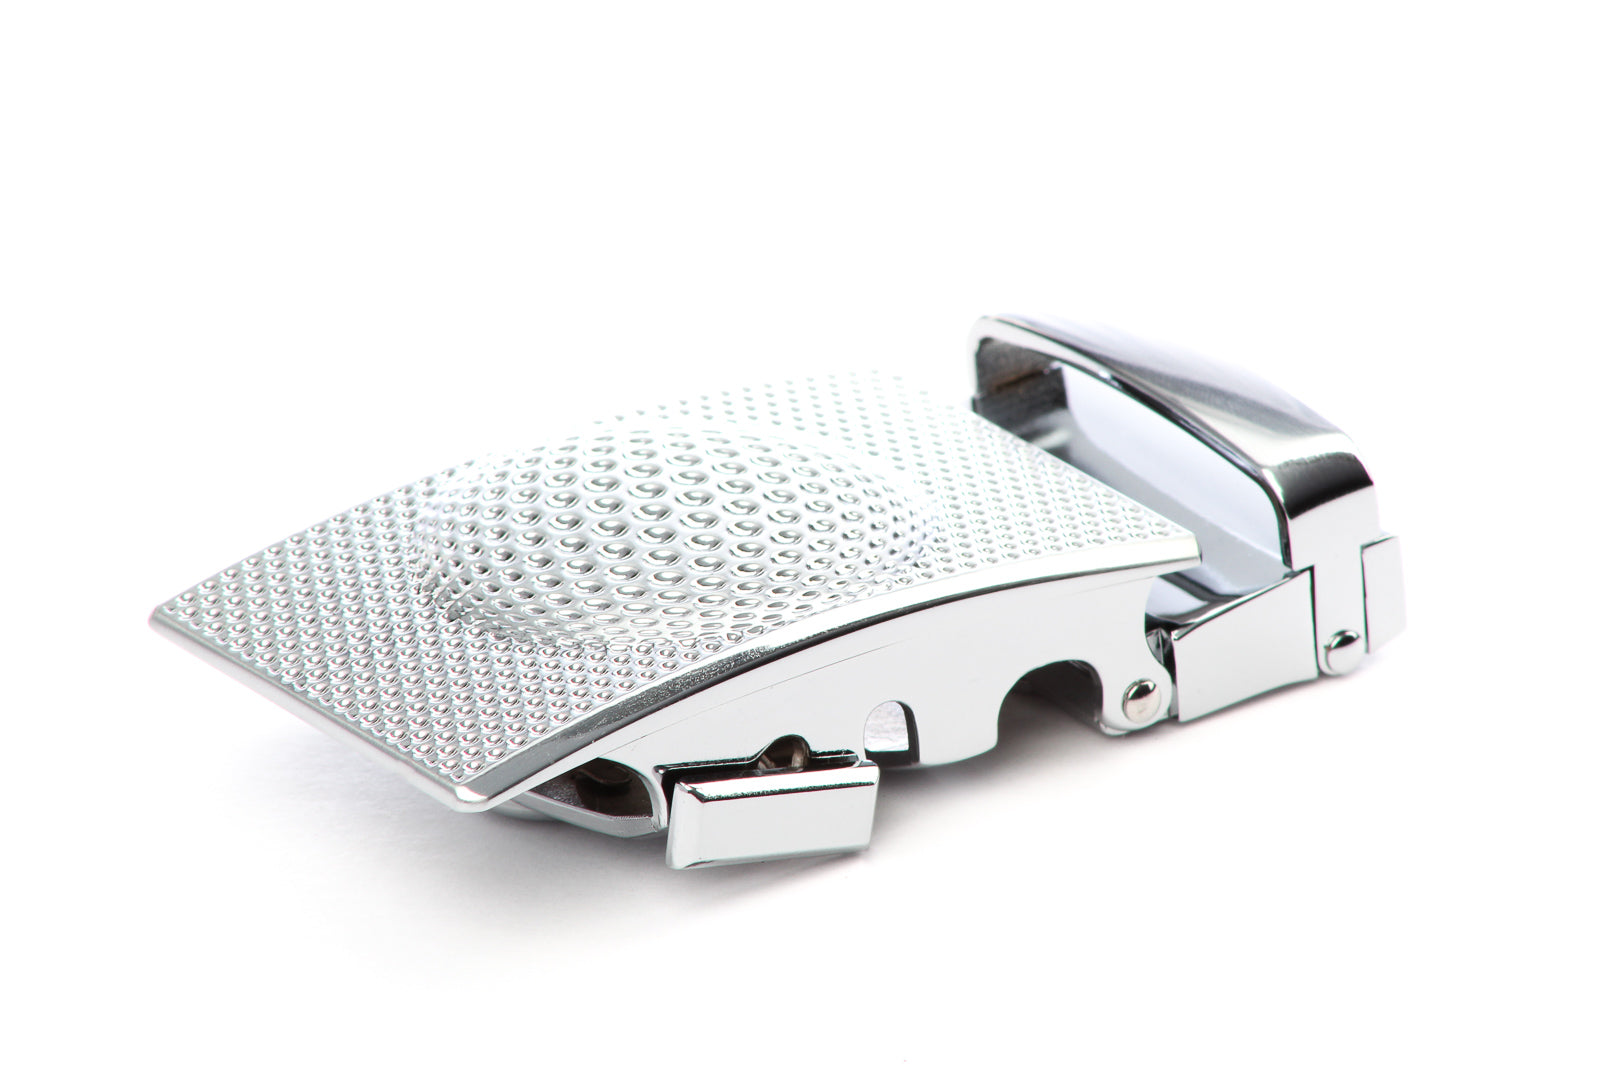 Men's golf ratchet belt buckle in silver with a width of 1.5 inches.